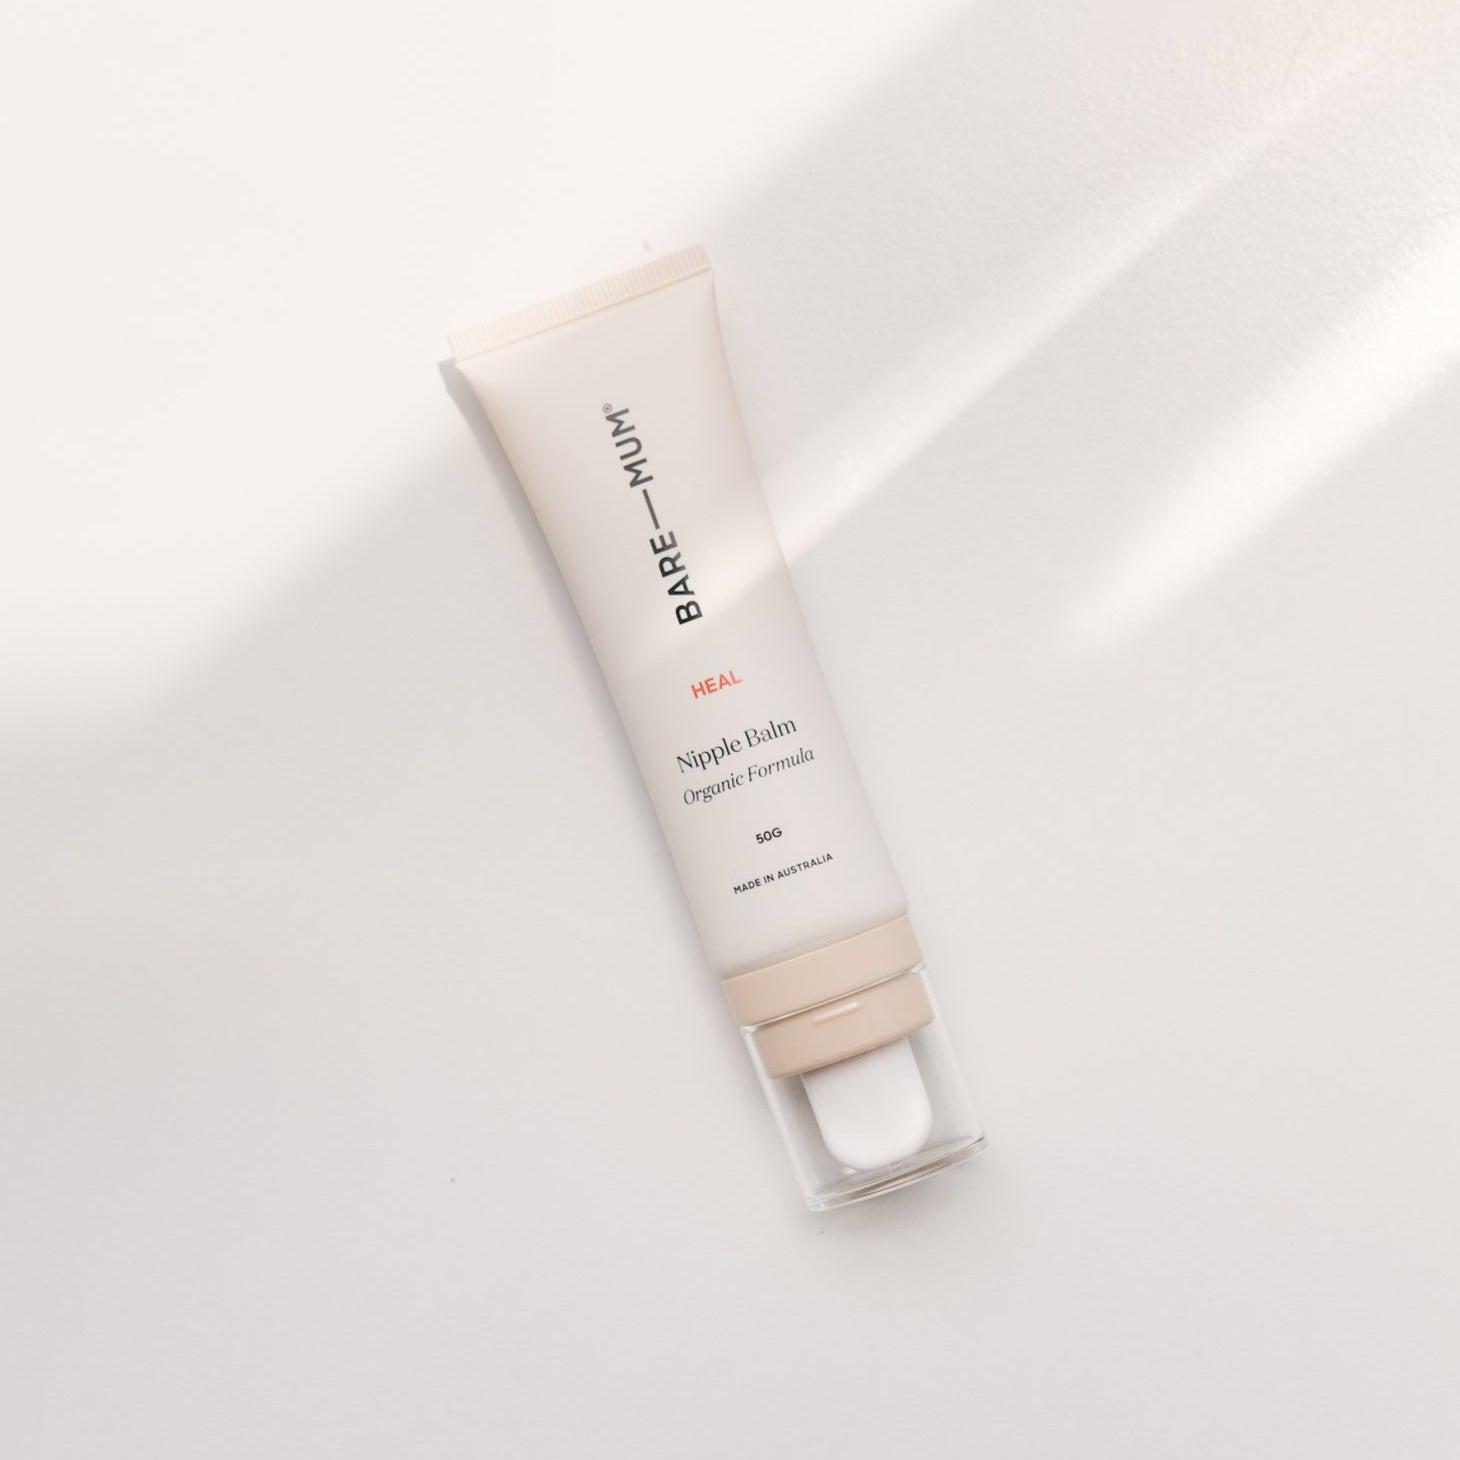 A tube of Bare Mum's bb cream for breastfeeding mothers, displayed on a white surface.